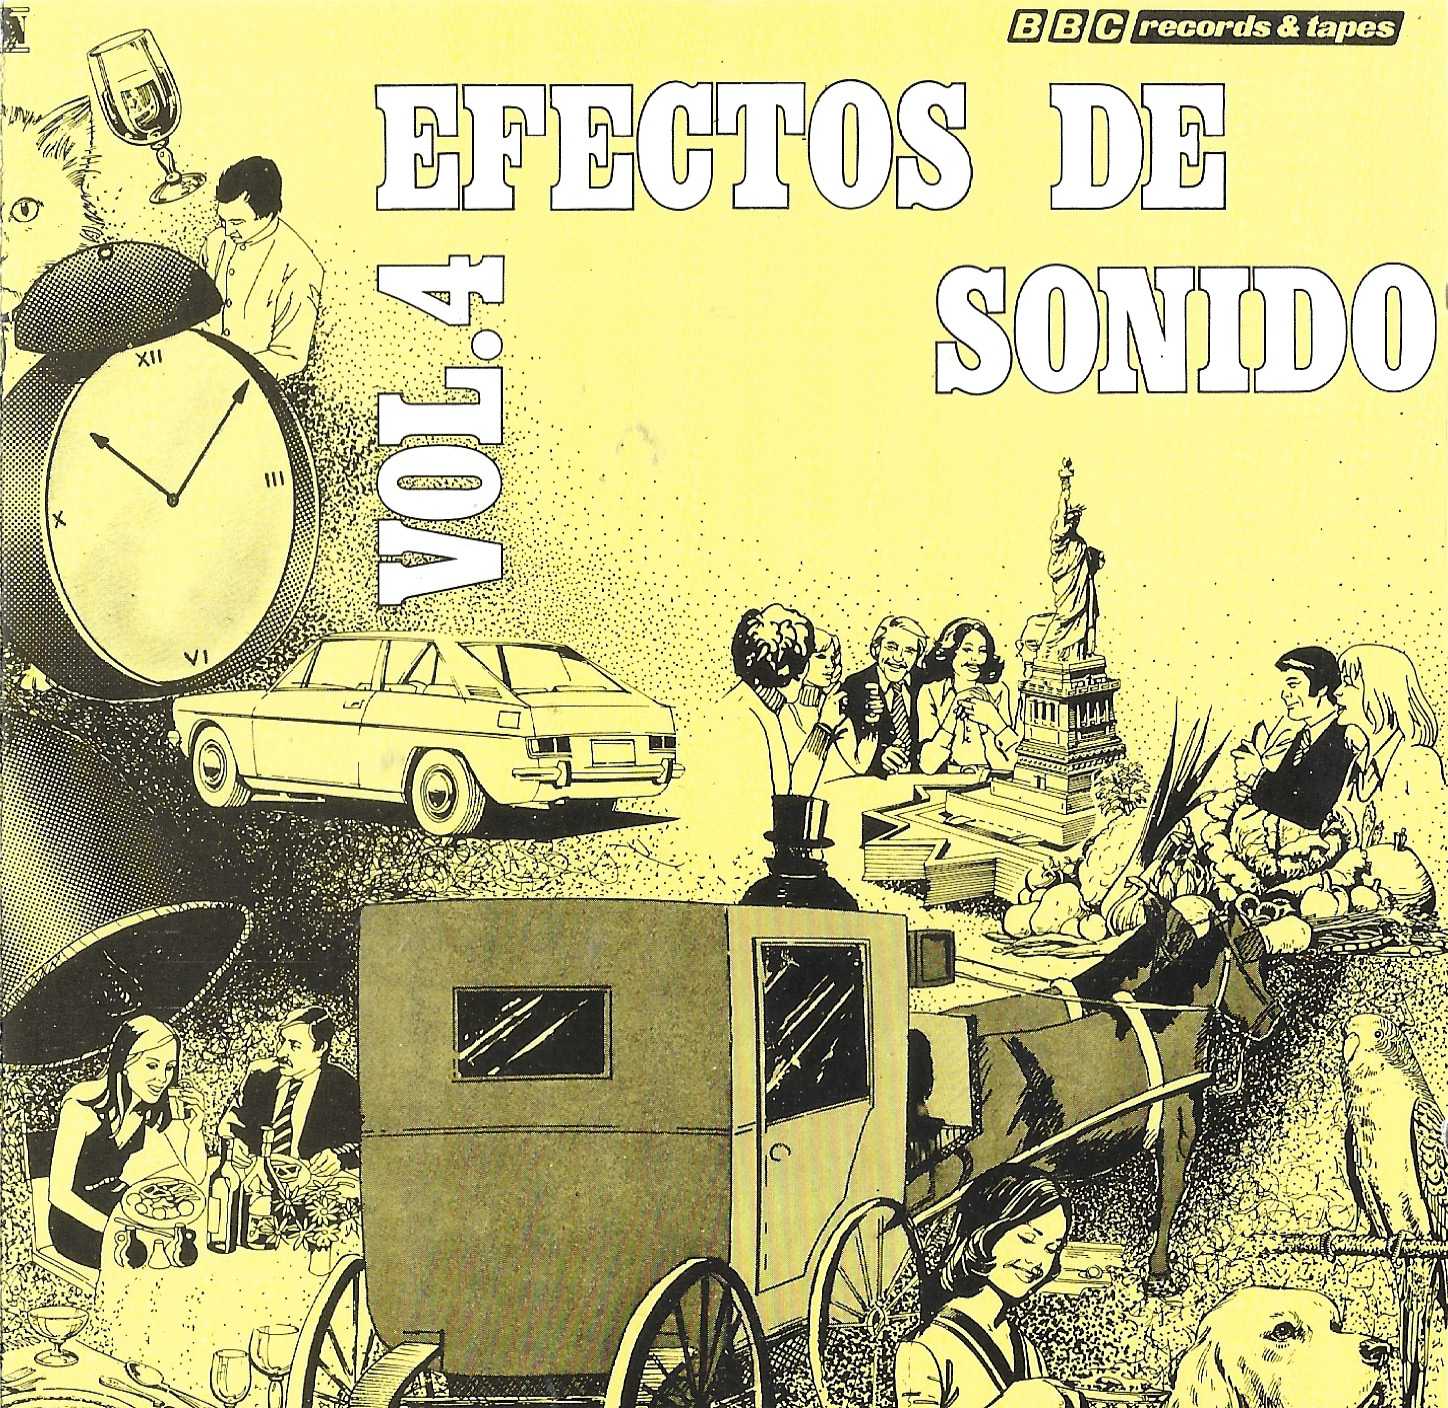 Picture of Effectos de sonido - Volume 4 by artist Various from the BBC cds - Records and Tapes library